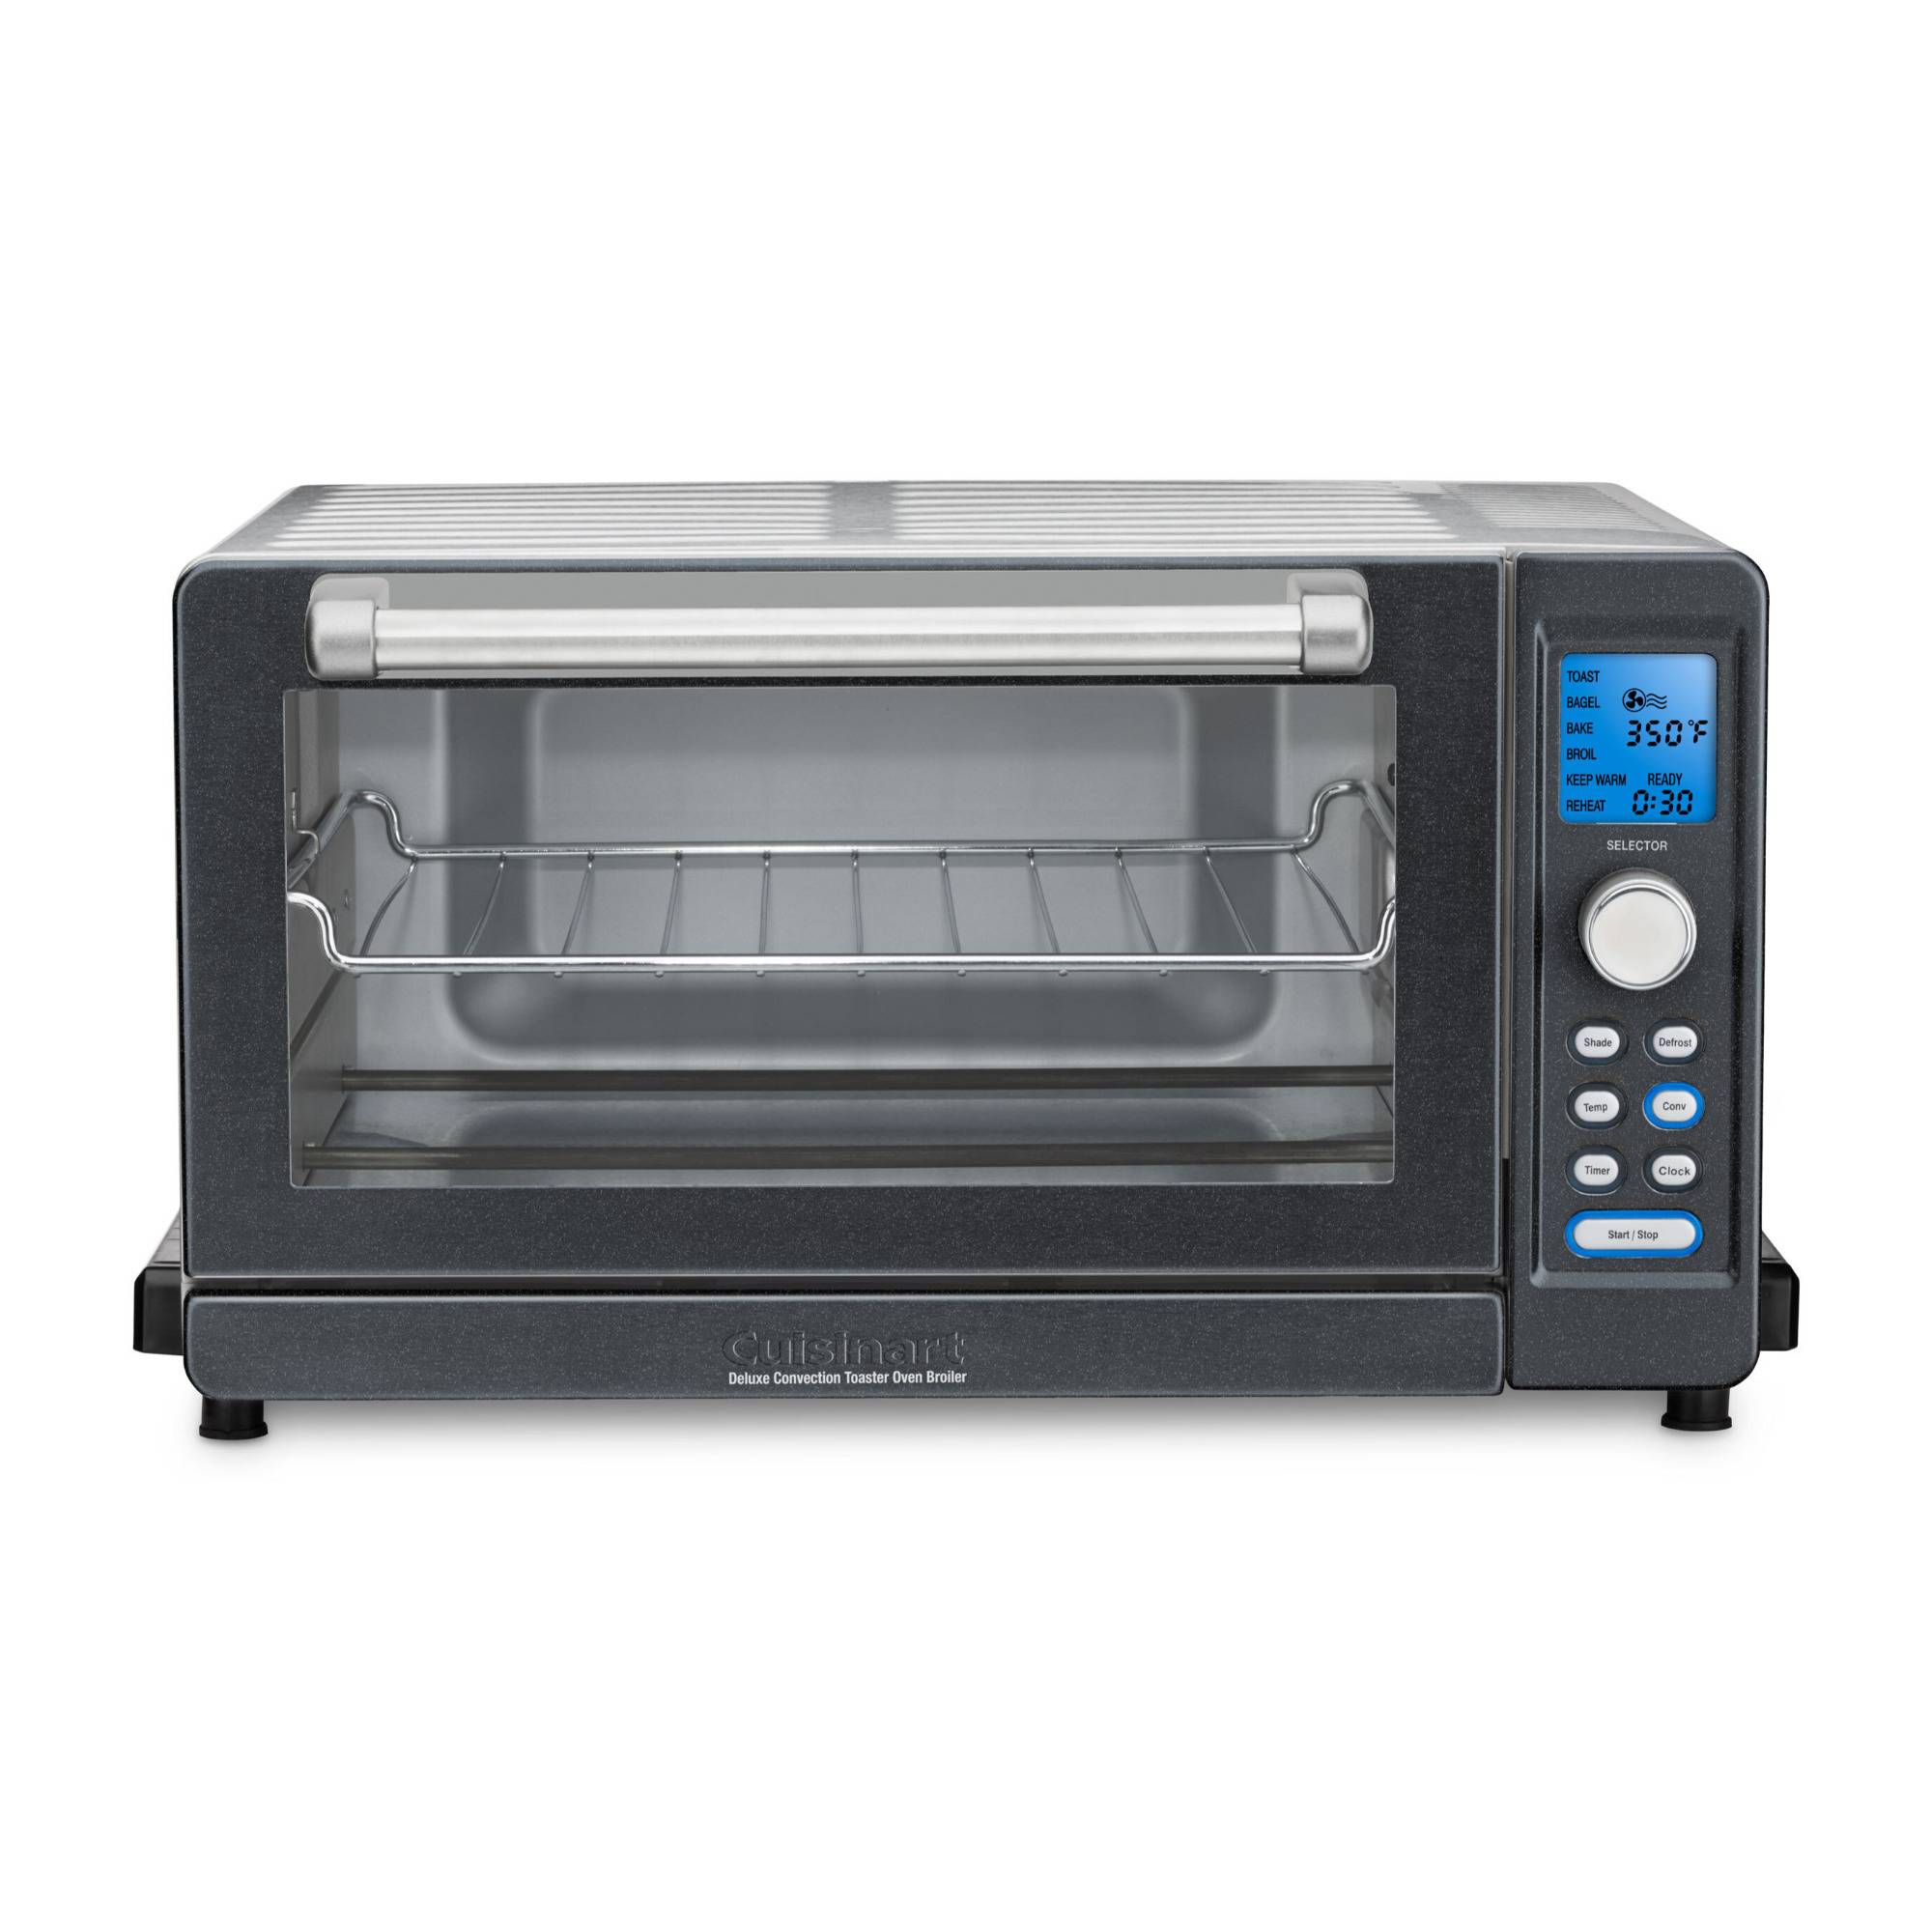 Cuisinart Deluxe Convection Toaster Oven Broiler (Brushed Stainless Steel)